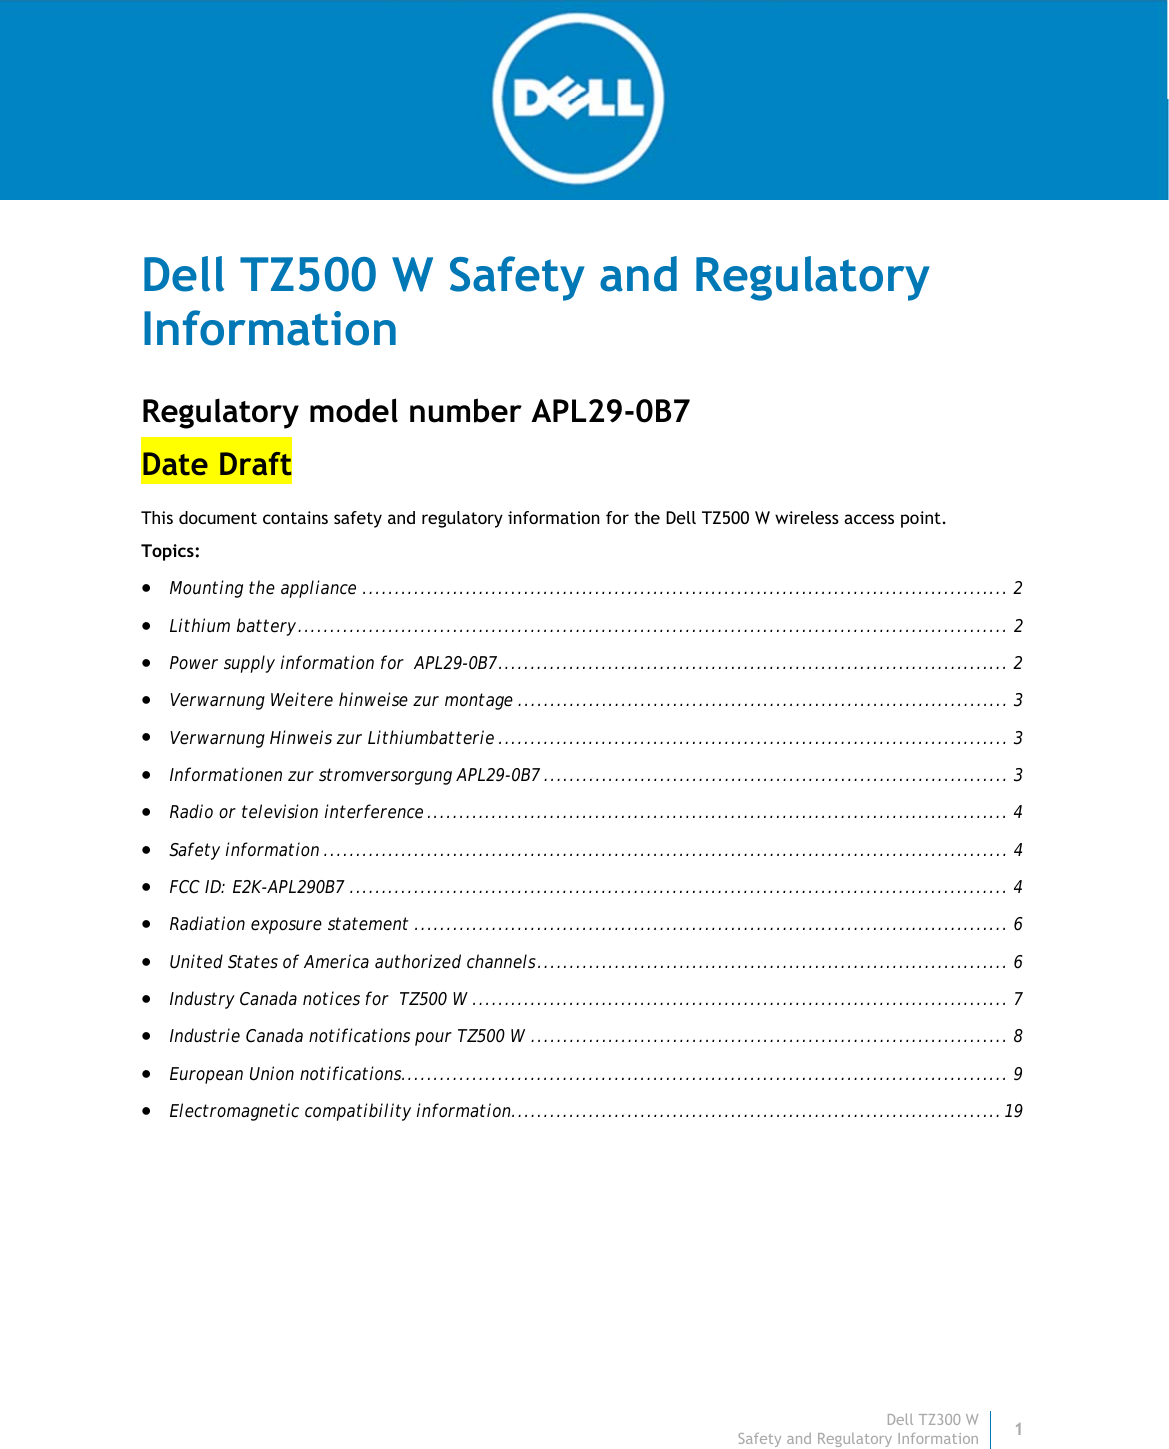 Dell TZ300 W1 Safety and Regulatory Information    Dell TZ500 W Safety and Regulatory Information Regulatory model number APL29-0B7 Date Draft This document contains safety and regulatory information for the Dell TZ500 W wireless access point.  Topics:   Mounting the appliance .................................................................................................... 2 Lithium battery .............................................................................................................. 2 Power supply information for  APL29-0B7 ............................................................................... 2 Verwarnung Weitere hinweise zur montage ............................................................................ 3 Verwarnung Hinweis zur Lithiumbatterie ............................................................................... 3 Informationen zur stromversorgung APL29-0B7 ........................................................................ 3 Radio or television interference .......................................................................................... 4 Safety information .......................................................................................................... 4 FCC ID: E2K-APL290B7 ...................................................................................................... 4 Radiation exposure statement ............................................................................................ 6 United States of America authorized channels ......................................................................... 6 Industry Canada notices for  TZ500 W ................................................................................... 7 Industrie Canada notifications pour TZ500 W .......................................................................... 8 European Union notifications .............................................................................................. 9 Electromagnetic compatibility information............................................................................ 19    